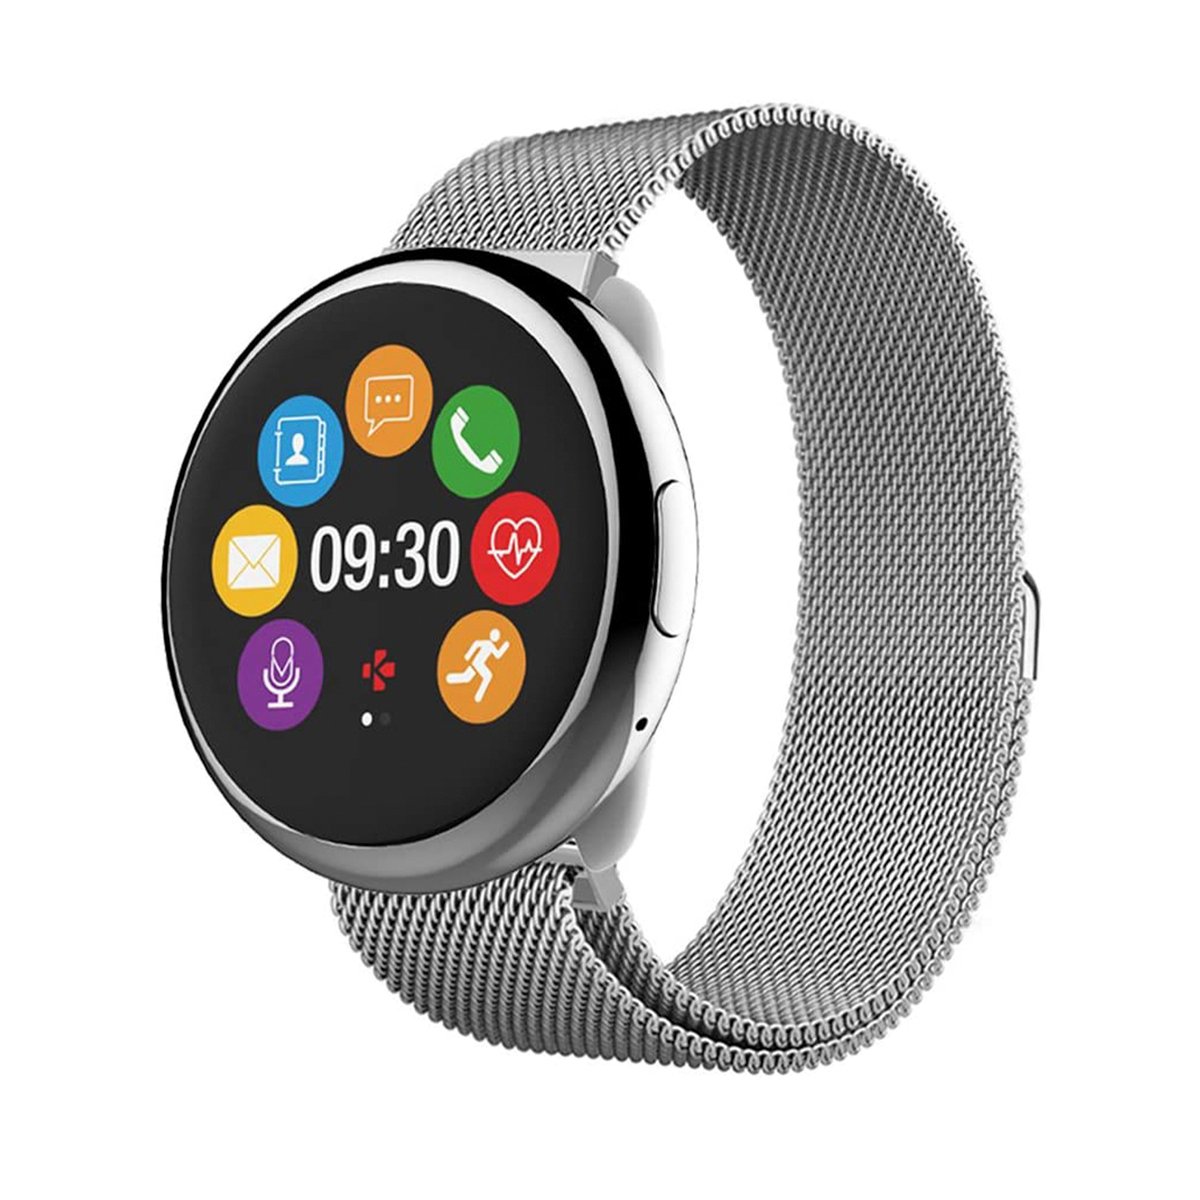 MyKronoz ZeRound2 HR Elite Smartwatch with Heart Rate Monitor and Smart Notifications, Silver